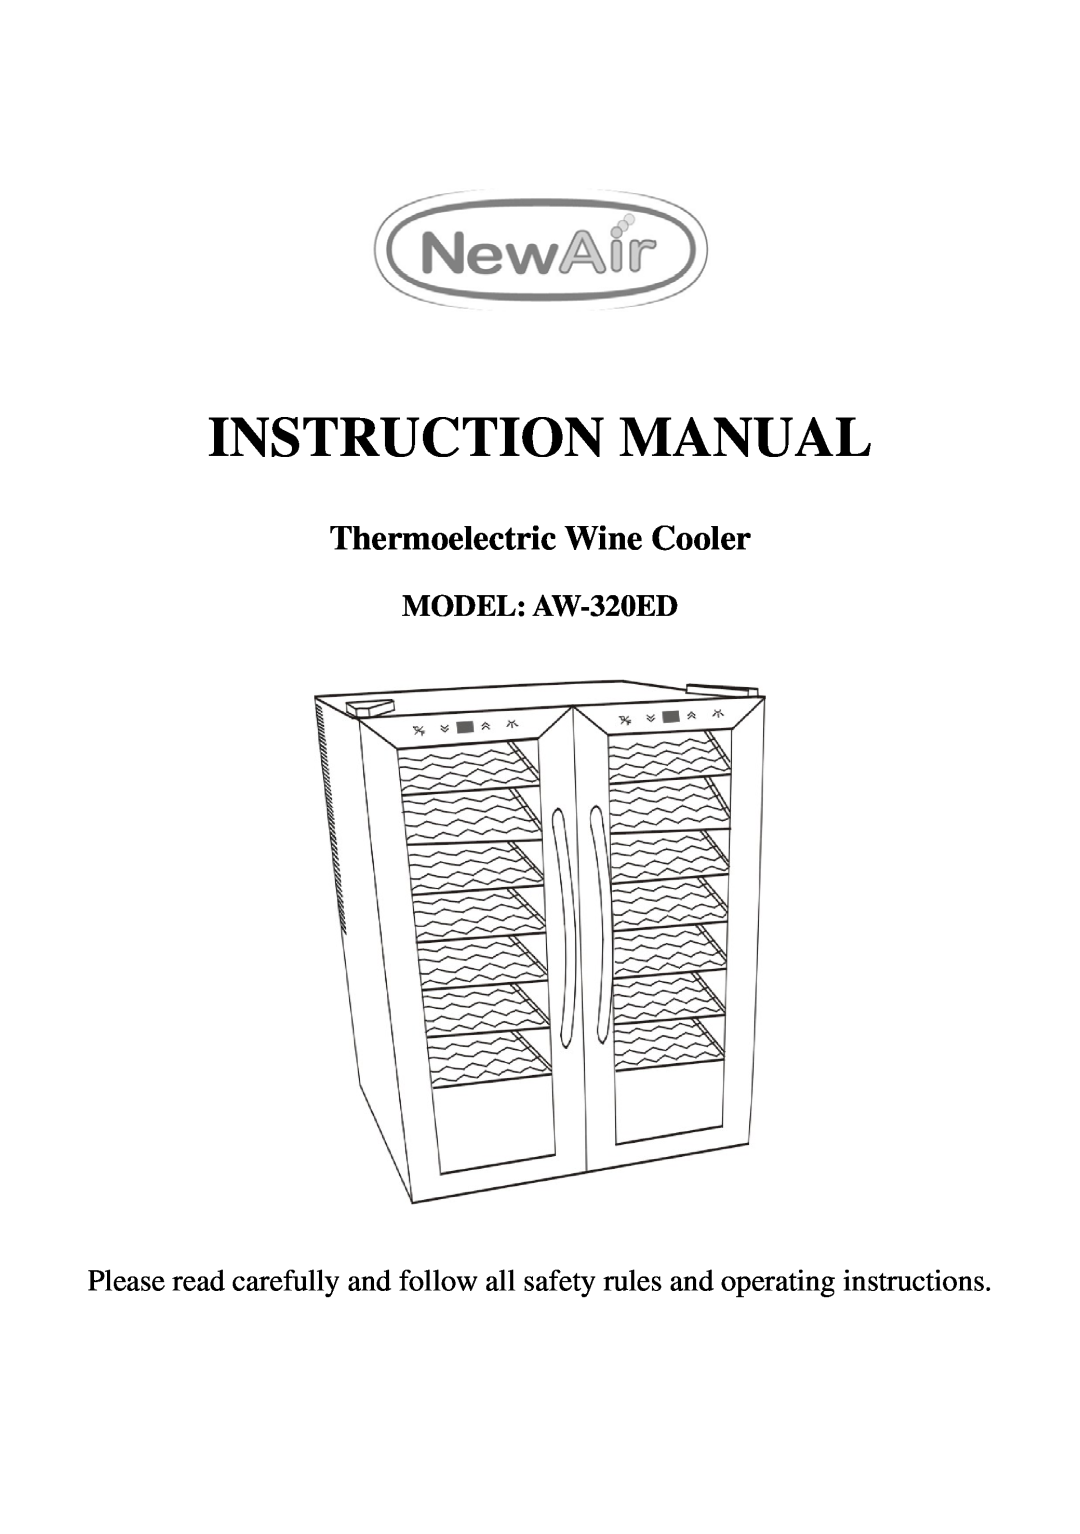 NewAir instruction manual MODEL AW-320ED, Thermoelectric Wine Cooler 